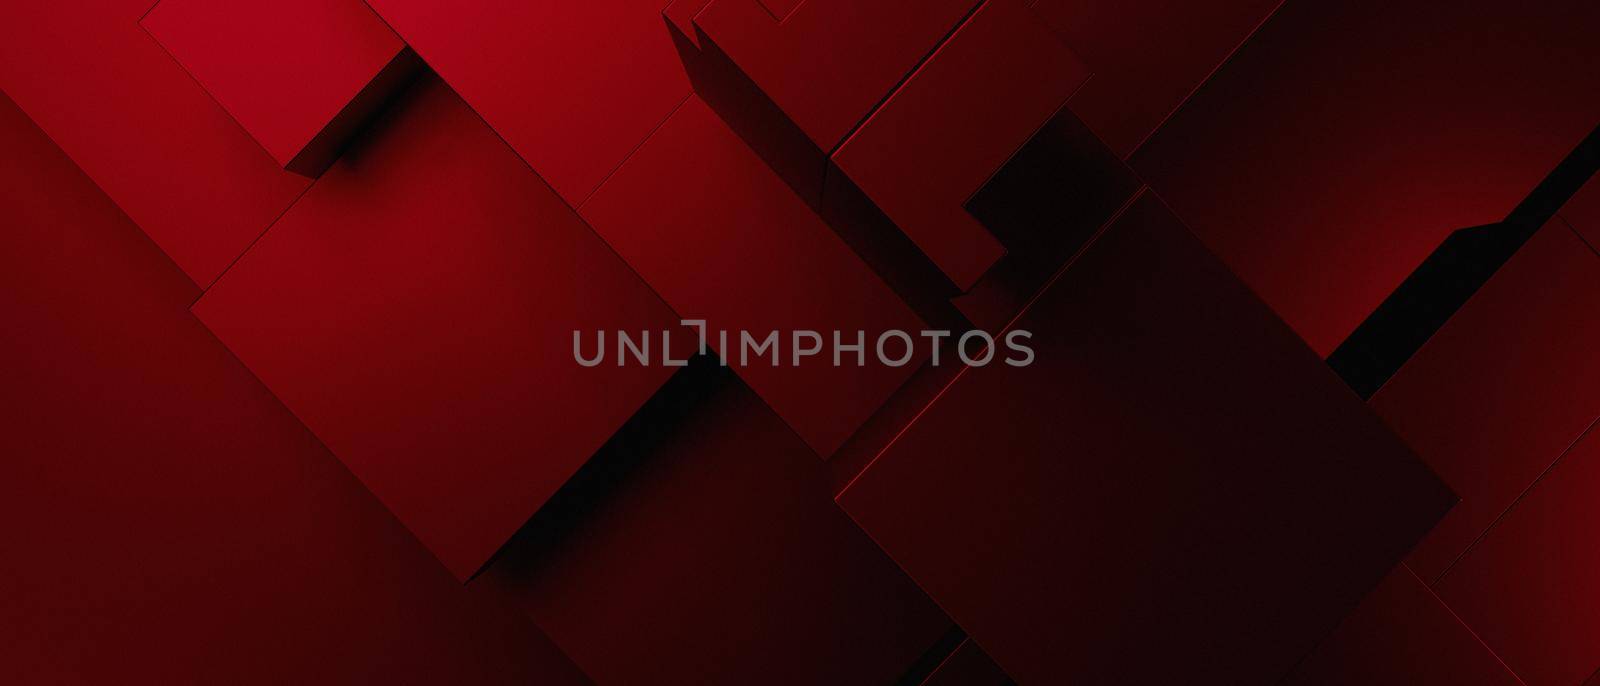 Abstract Luxury Futuristic Block Cubes Future Red 3D Background 3D Illustration by yay_lmrb